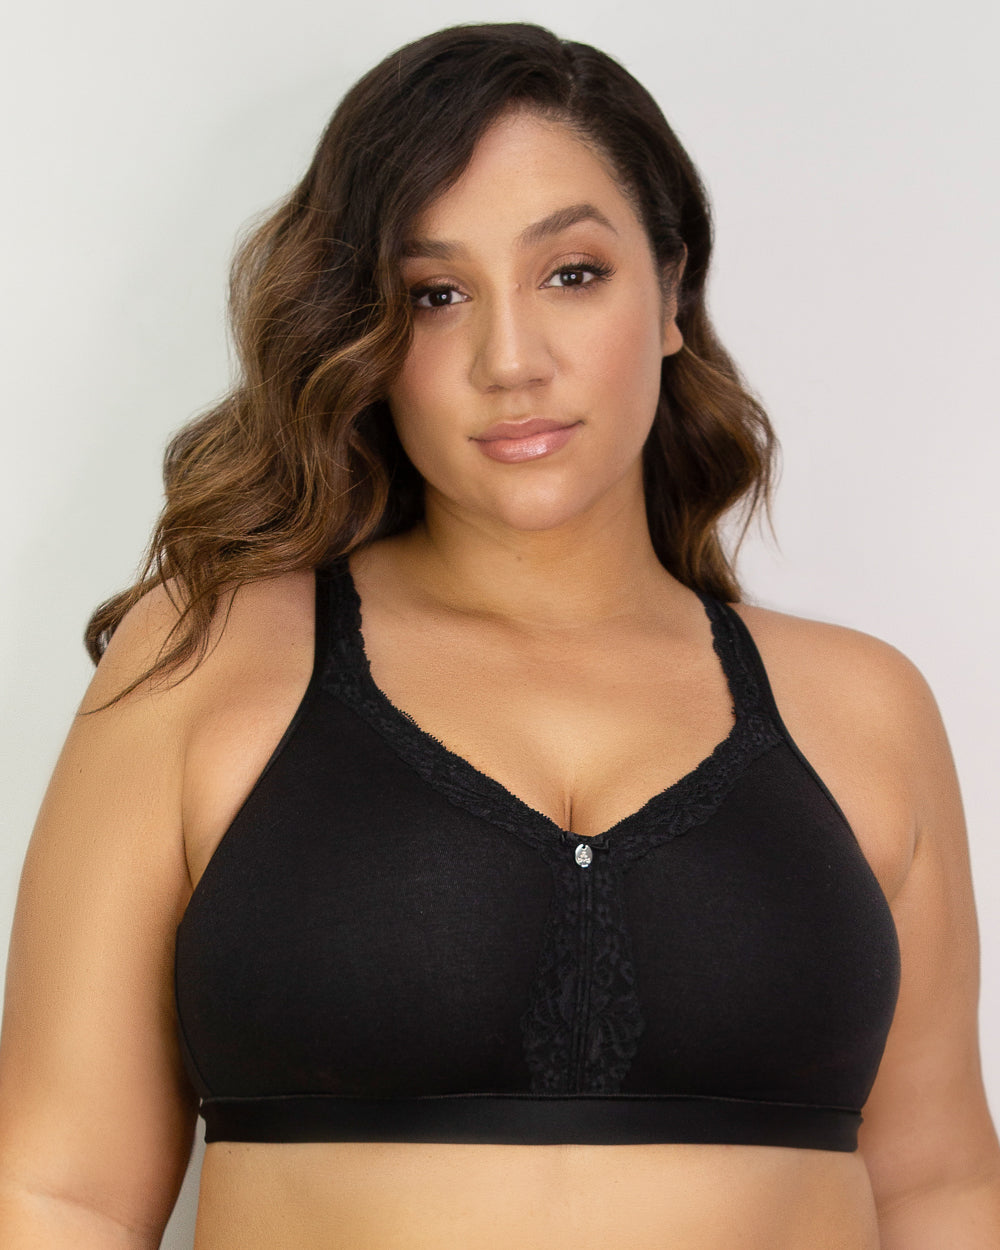 Cotton Luxe - Curvy Couture - cotton-luxe-wire-free-bra - The Pencil Test - Curvy Couture